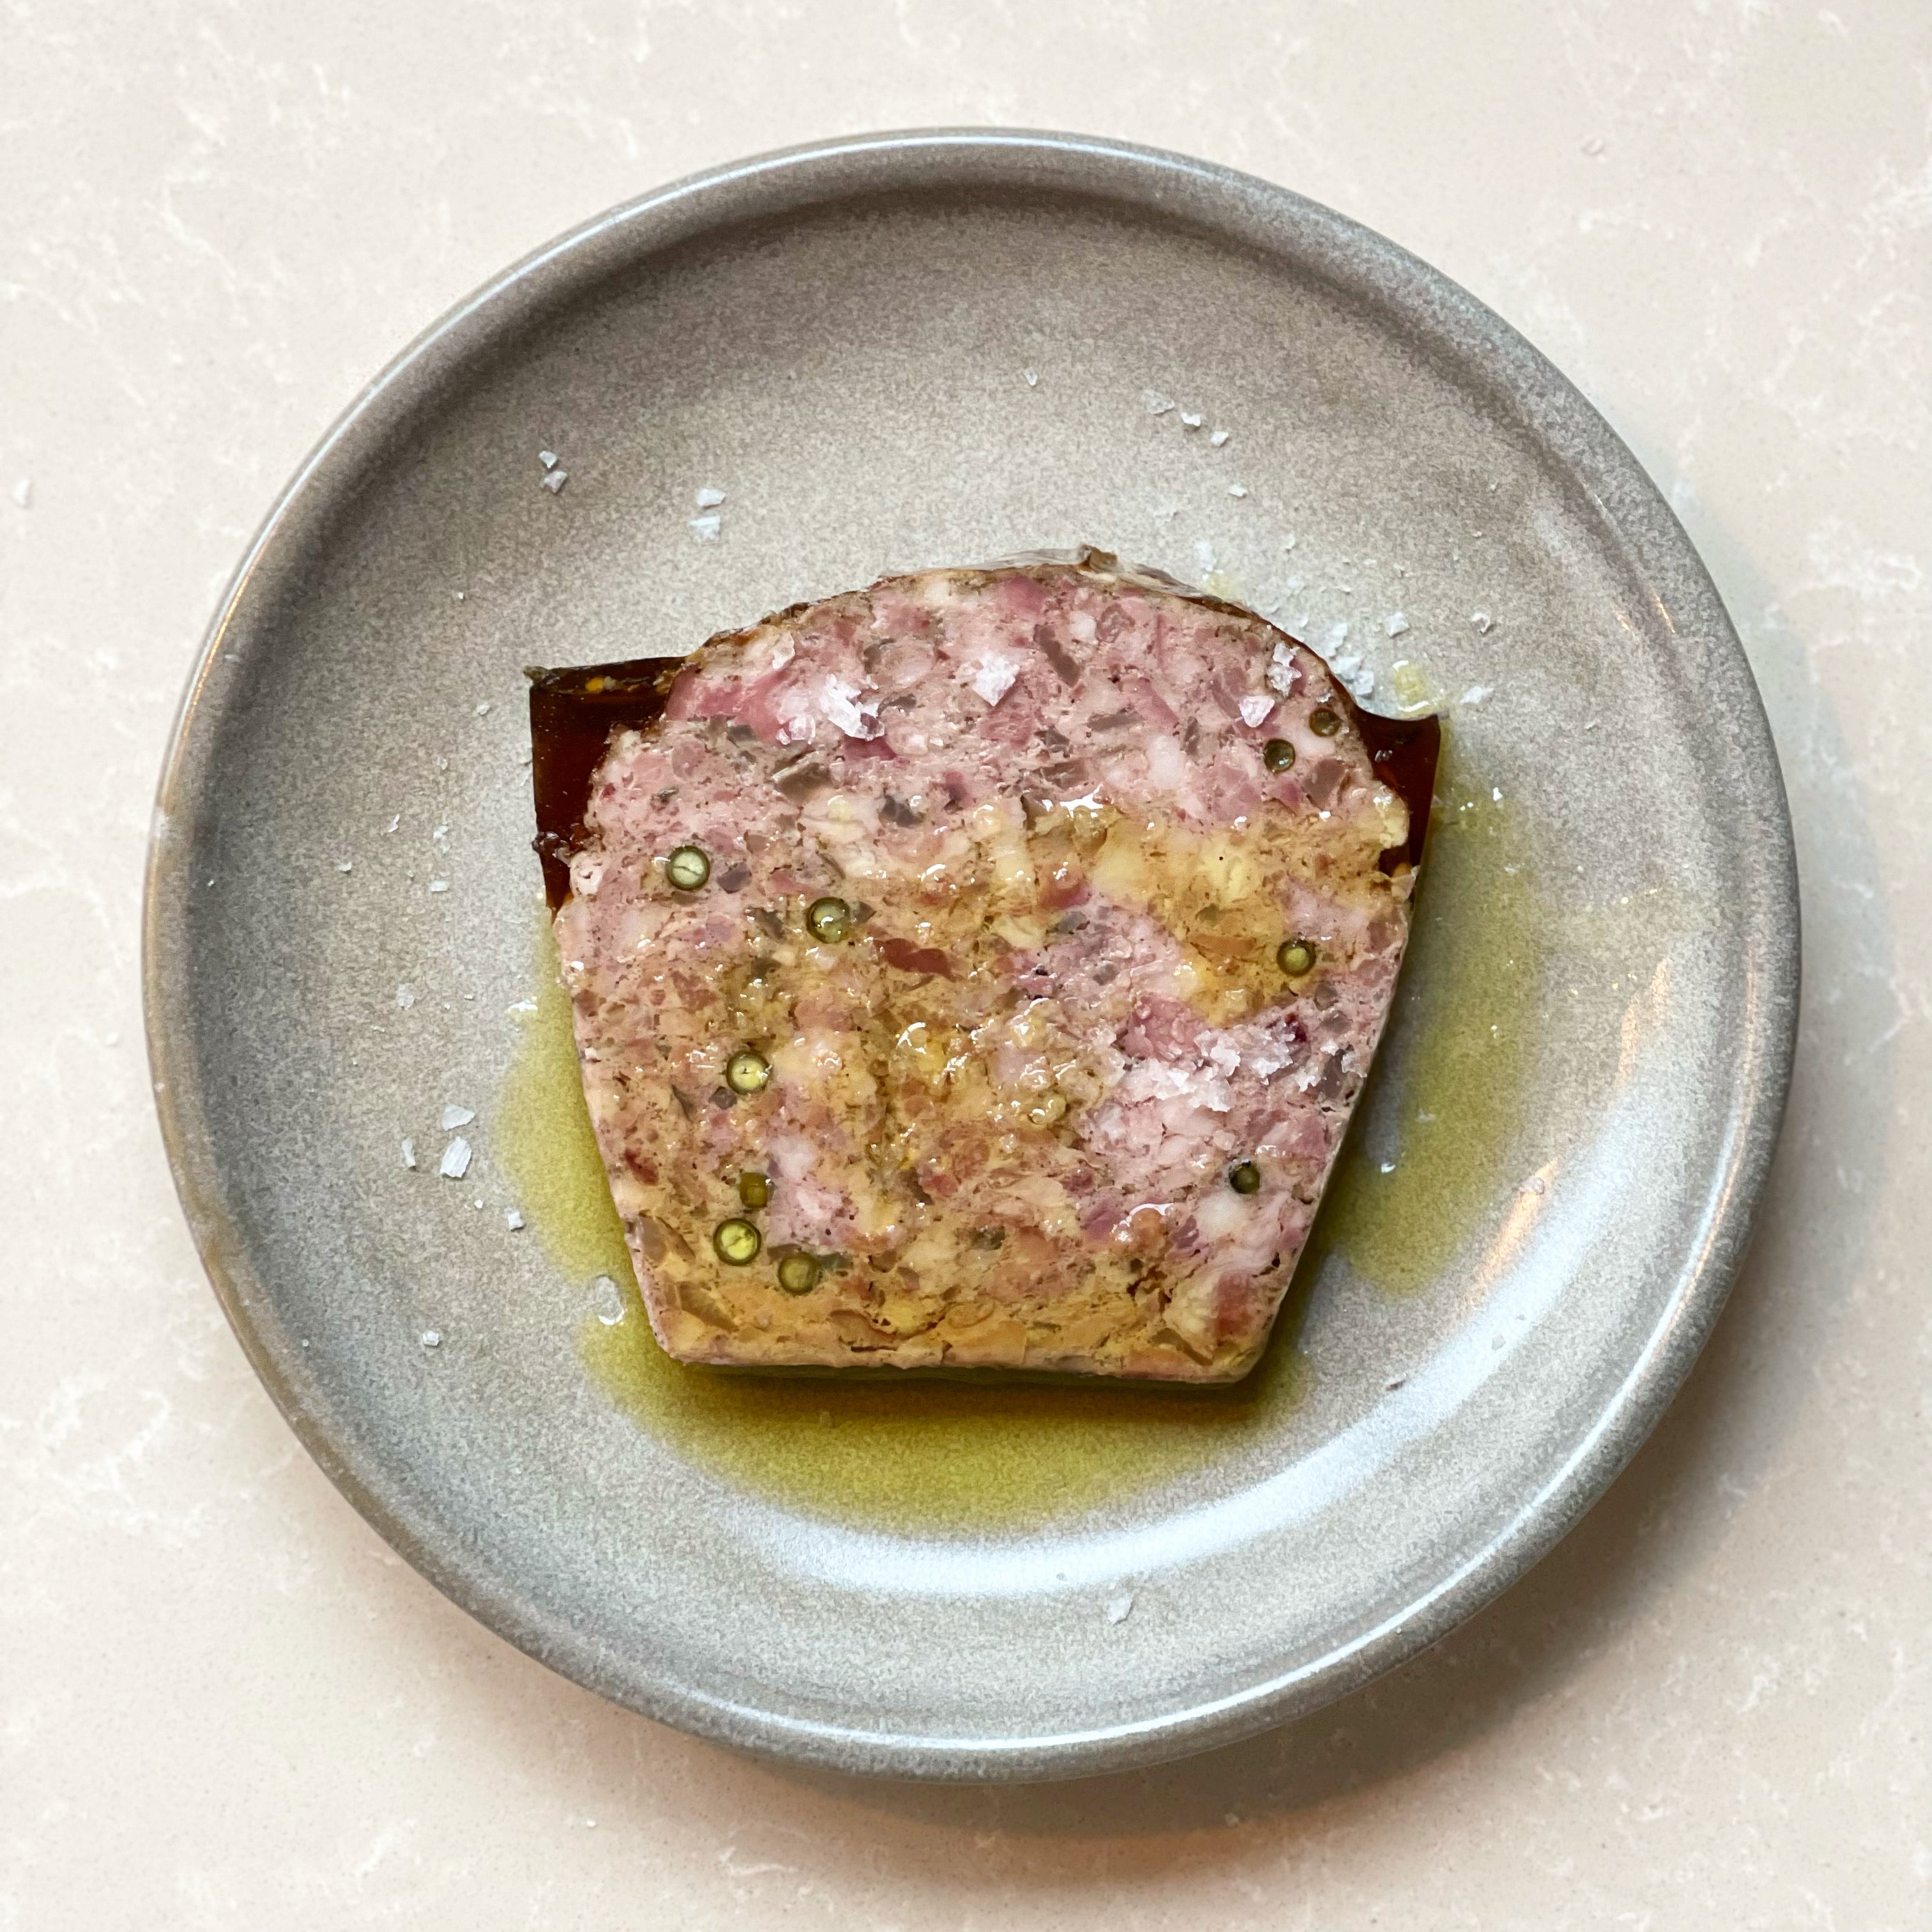 Countryside terrine - Available from 8th March